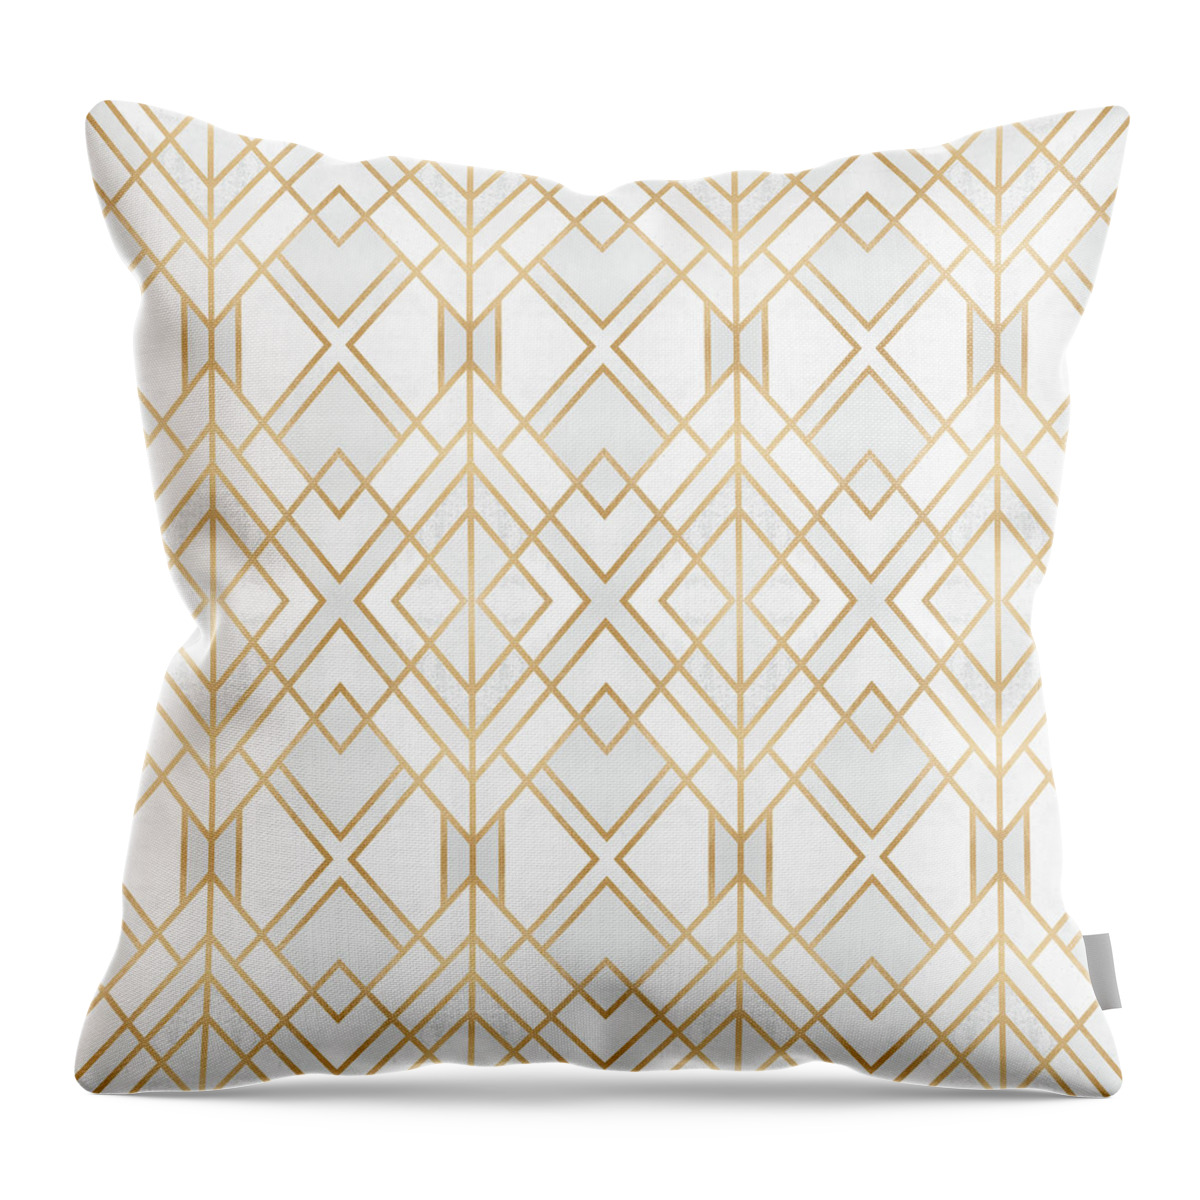 Graphic Throw Pillow featuring the digital art Golden Geo by Elisabeth Fredriksson